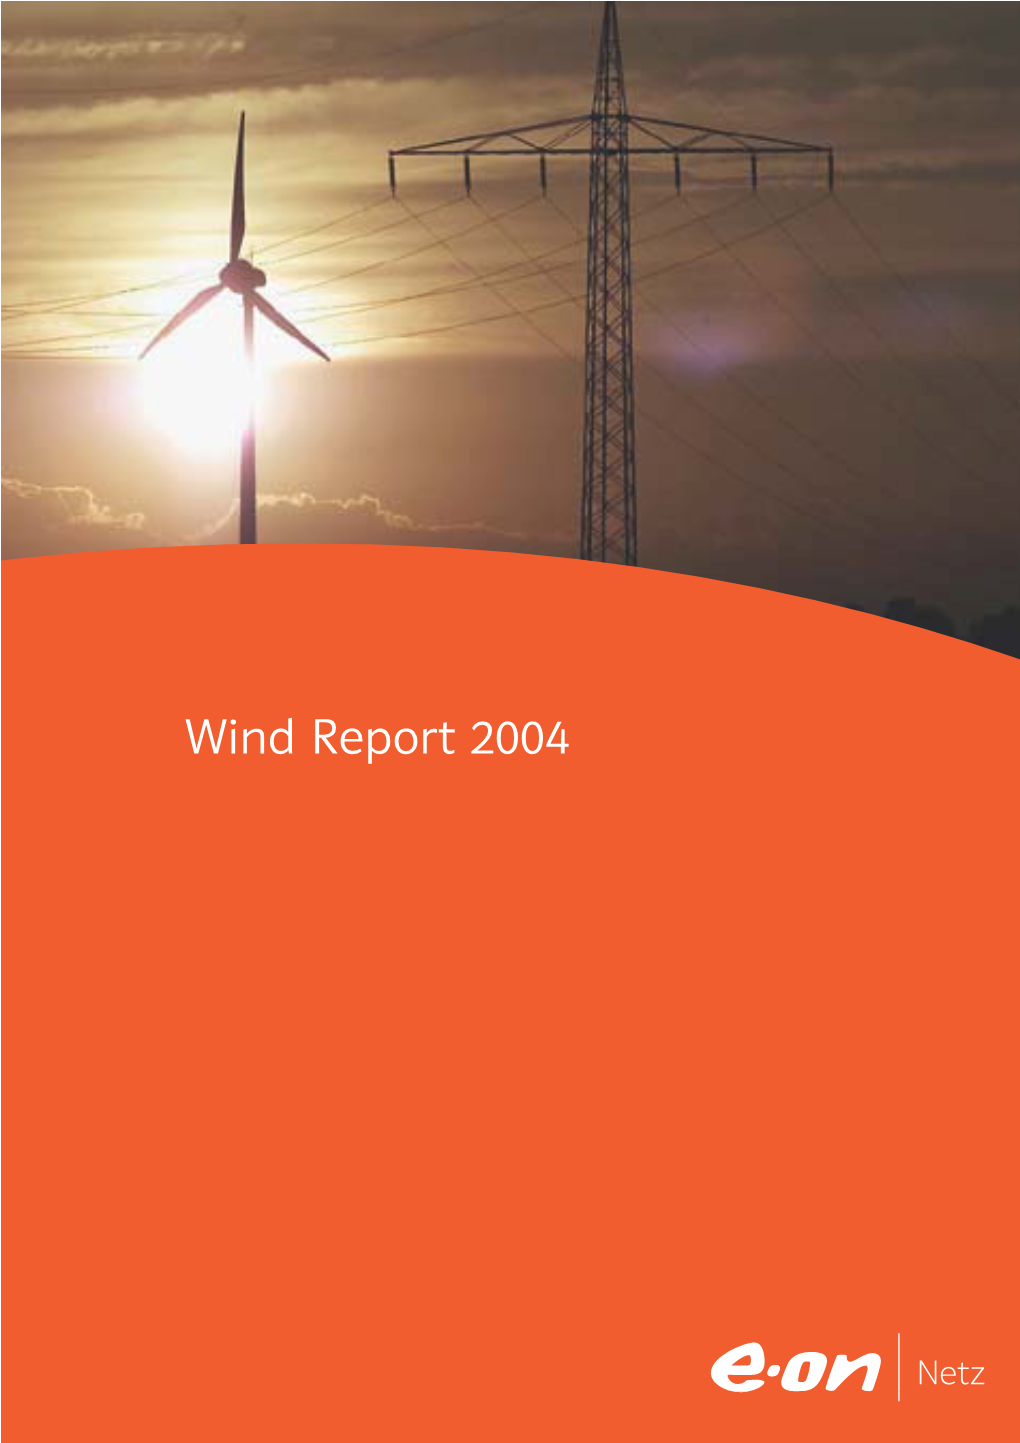 Wind Report 2004 Contents